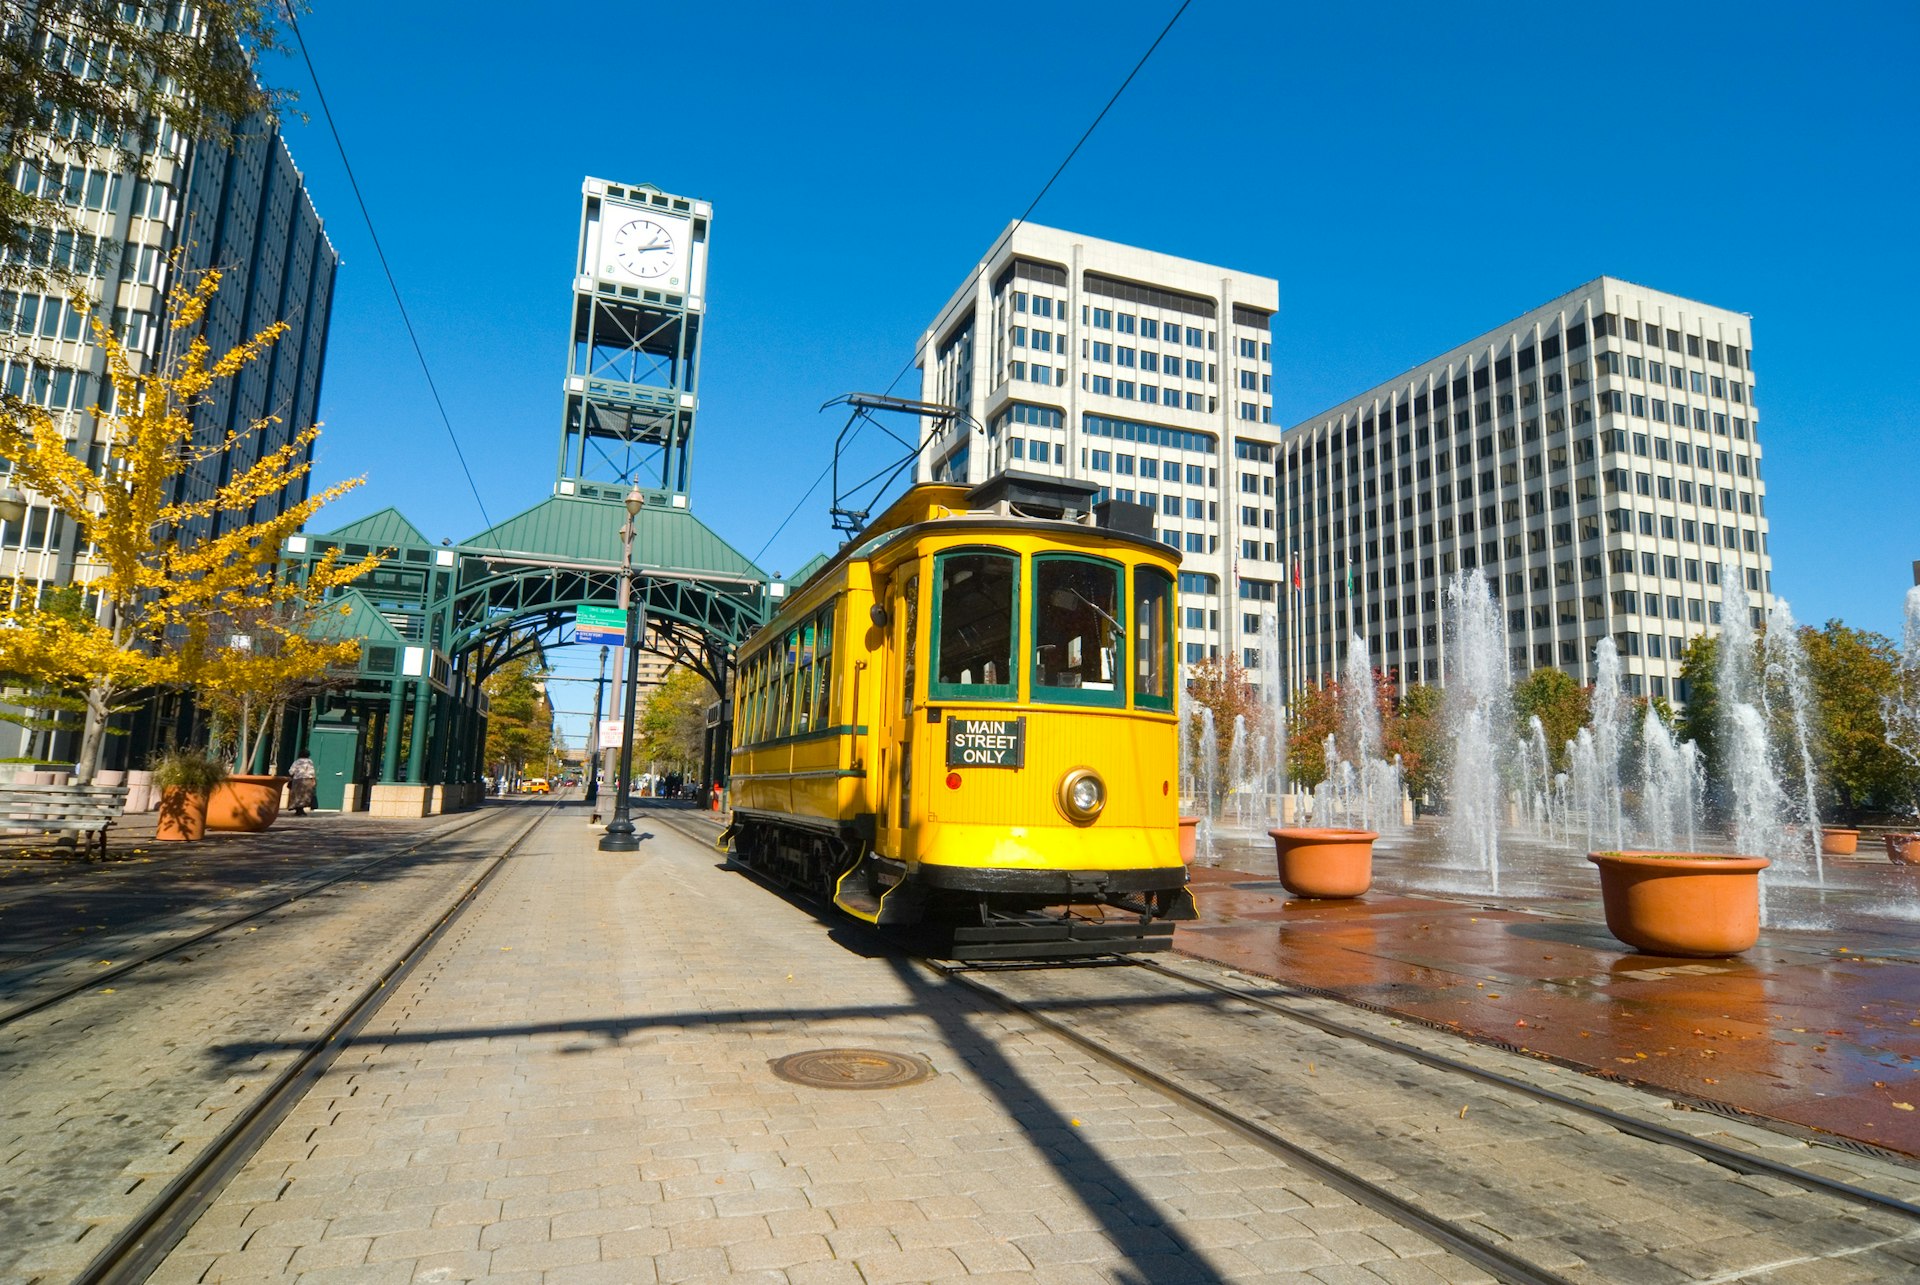 "The Historic Main Street Trolley in Memphis, Tennessee, with buildings, an elegant station, and water fountains in the background.